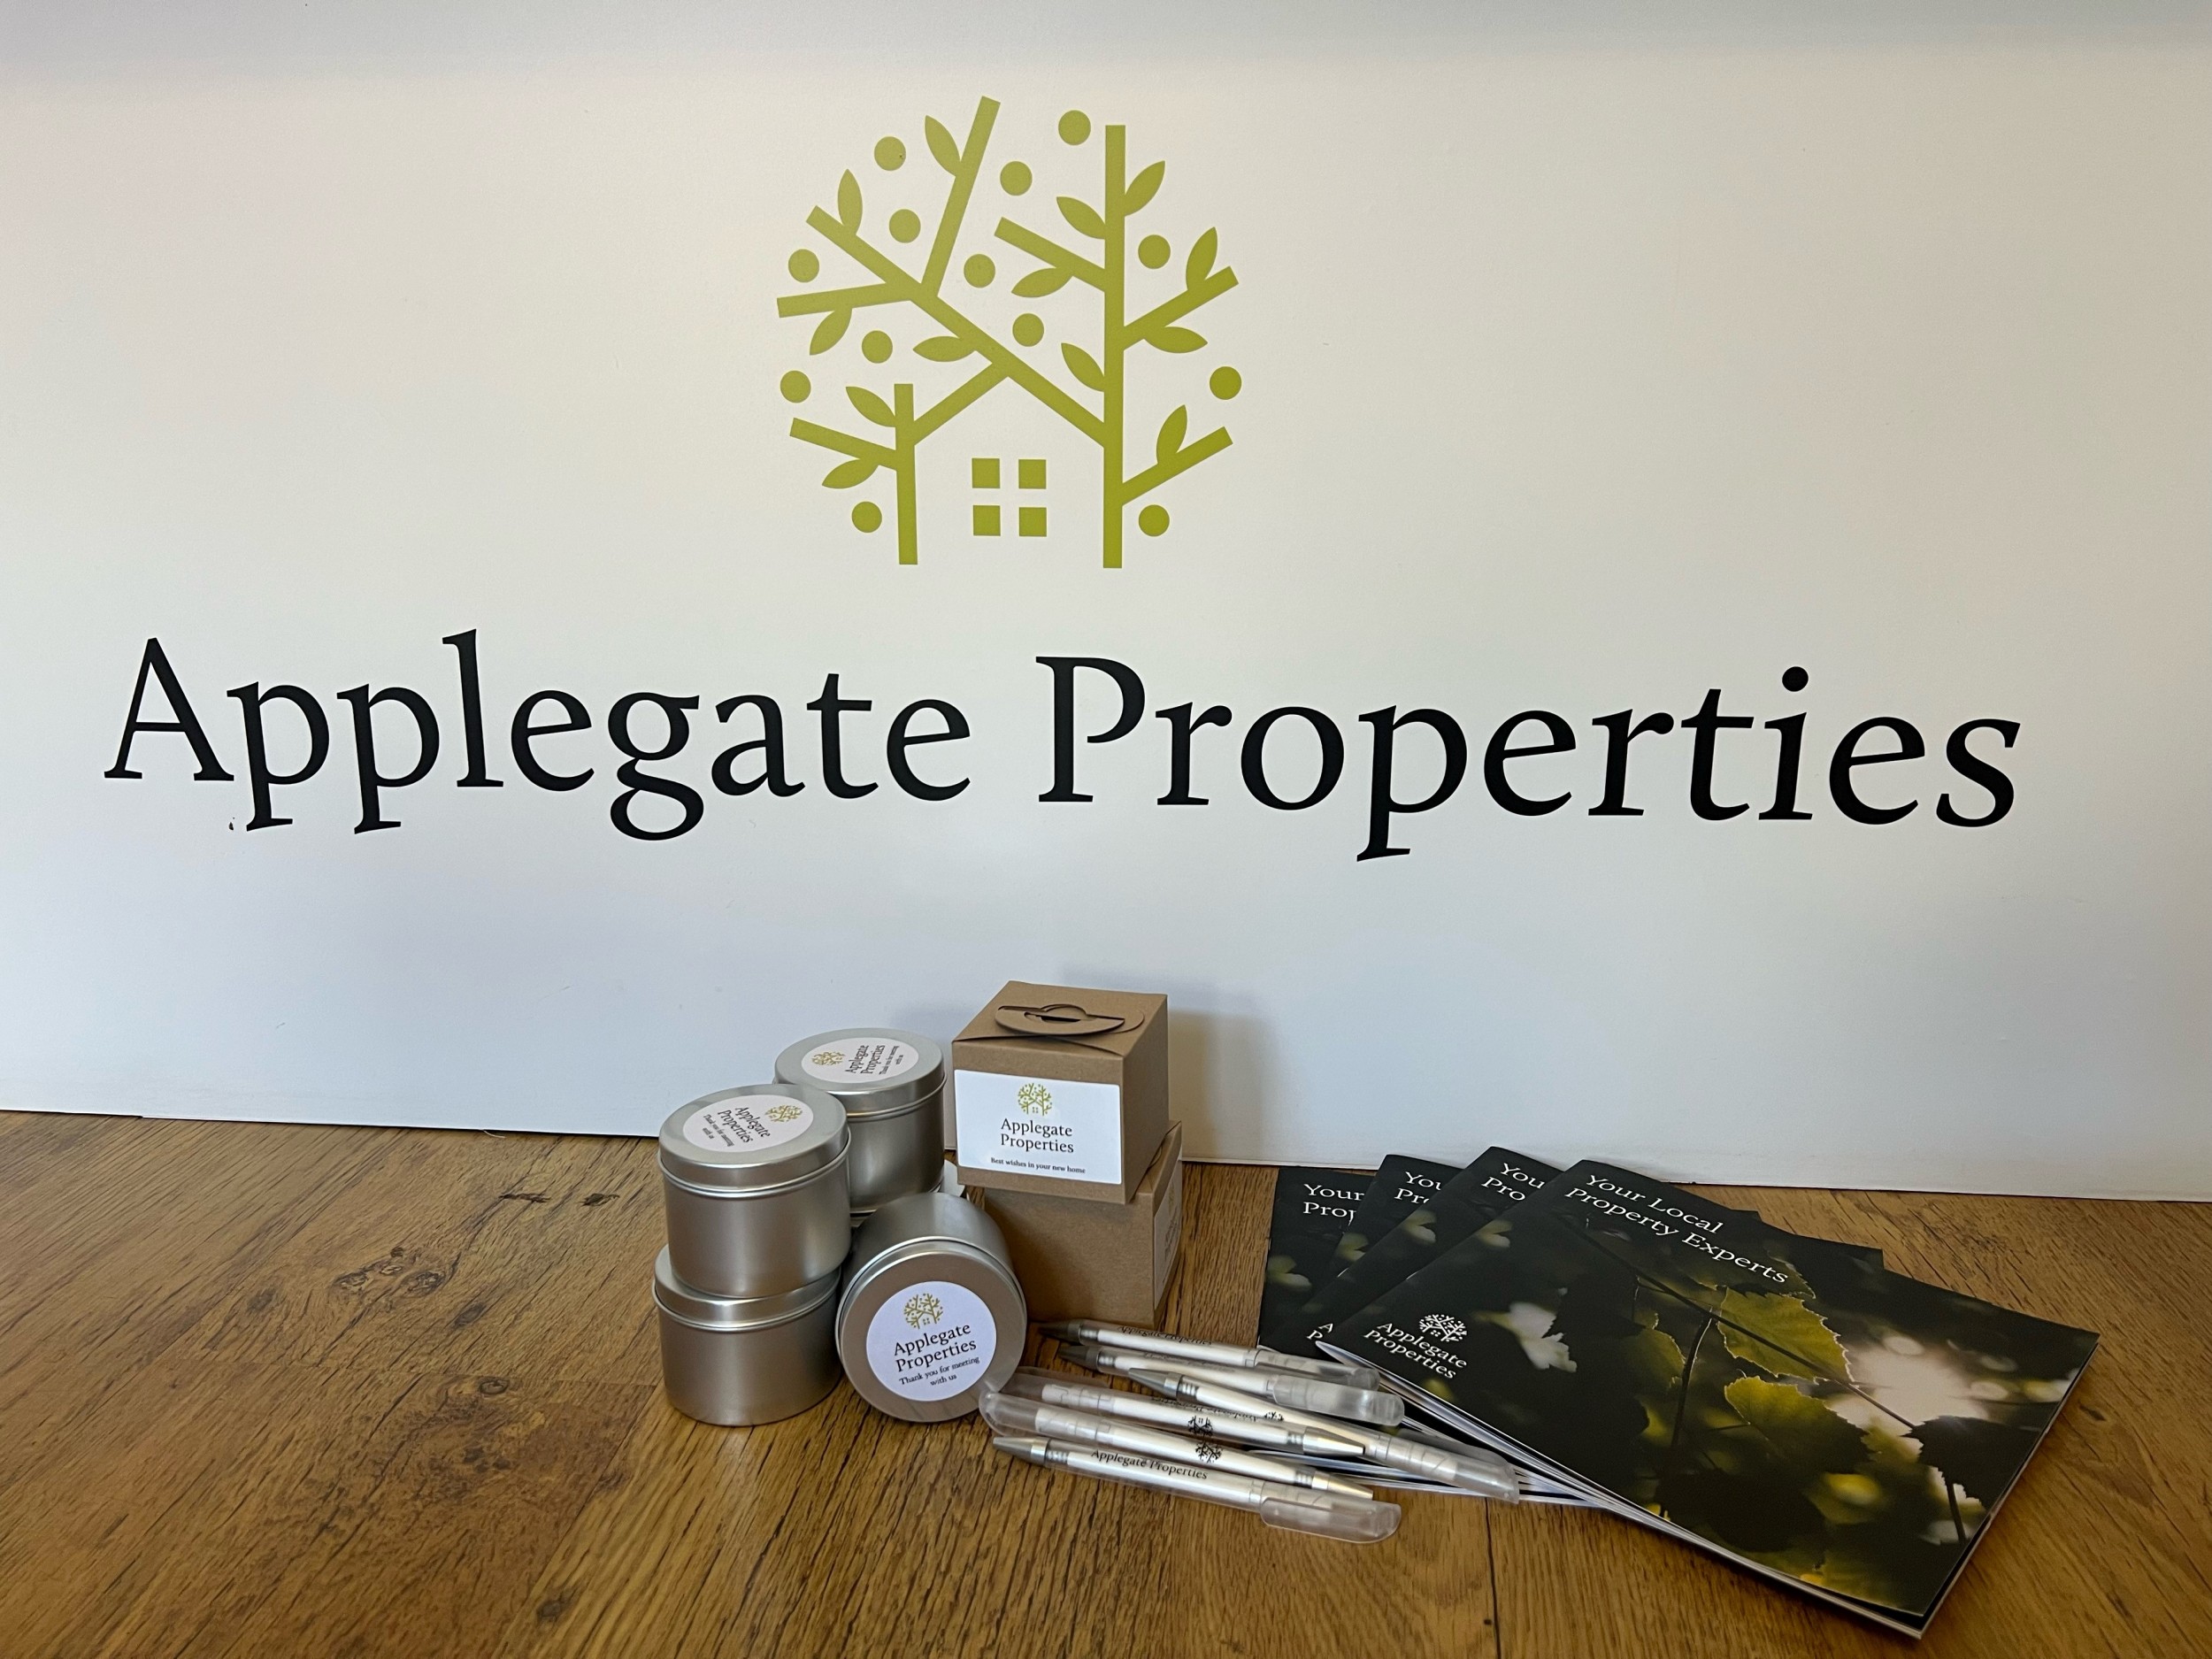 We need local suppliers to Join Applegate Properties in Celebrating Local Excellence!